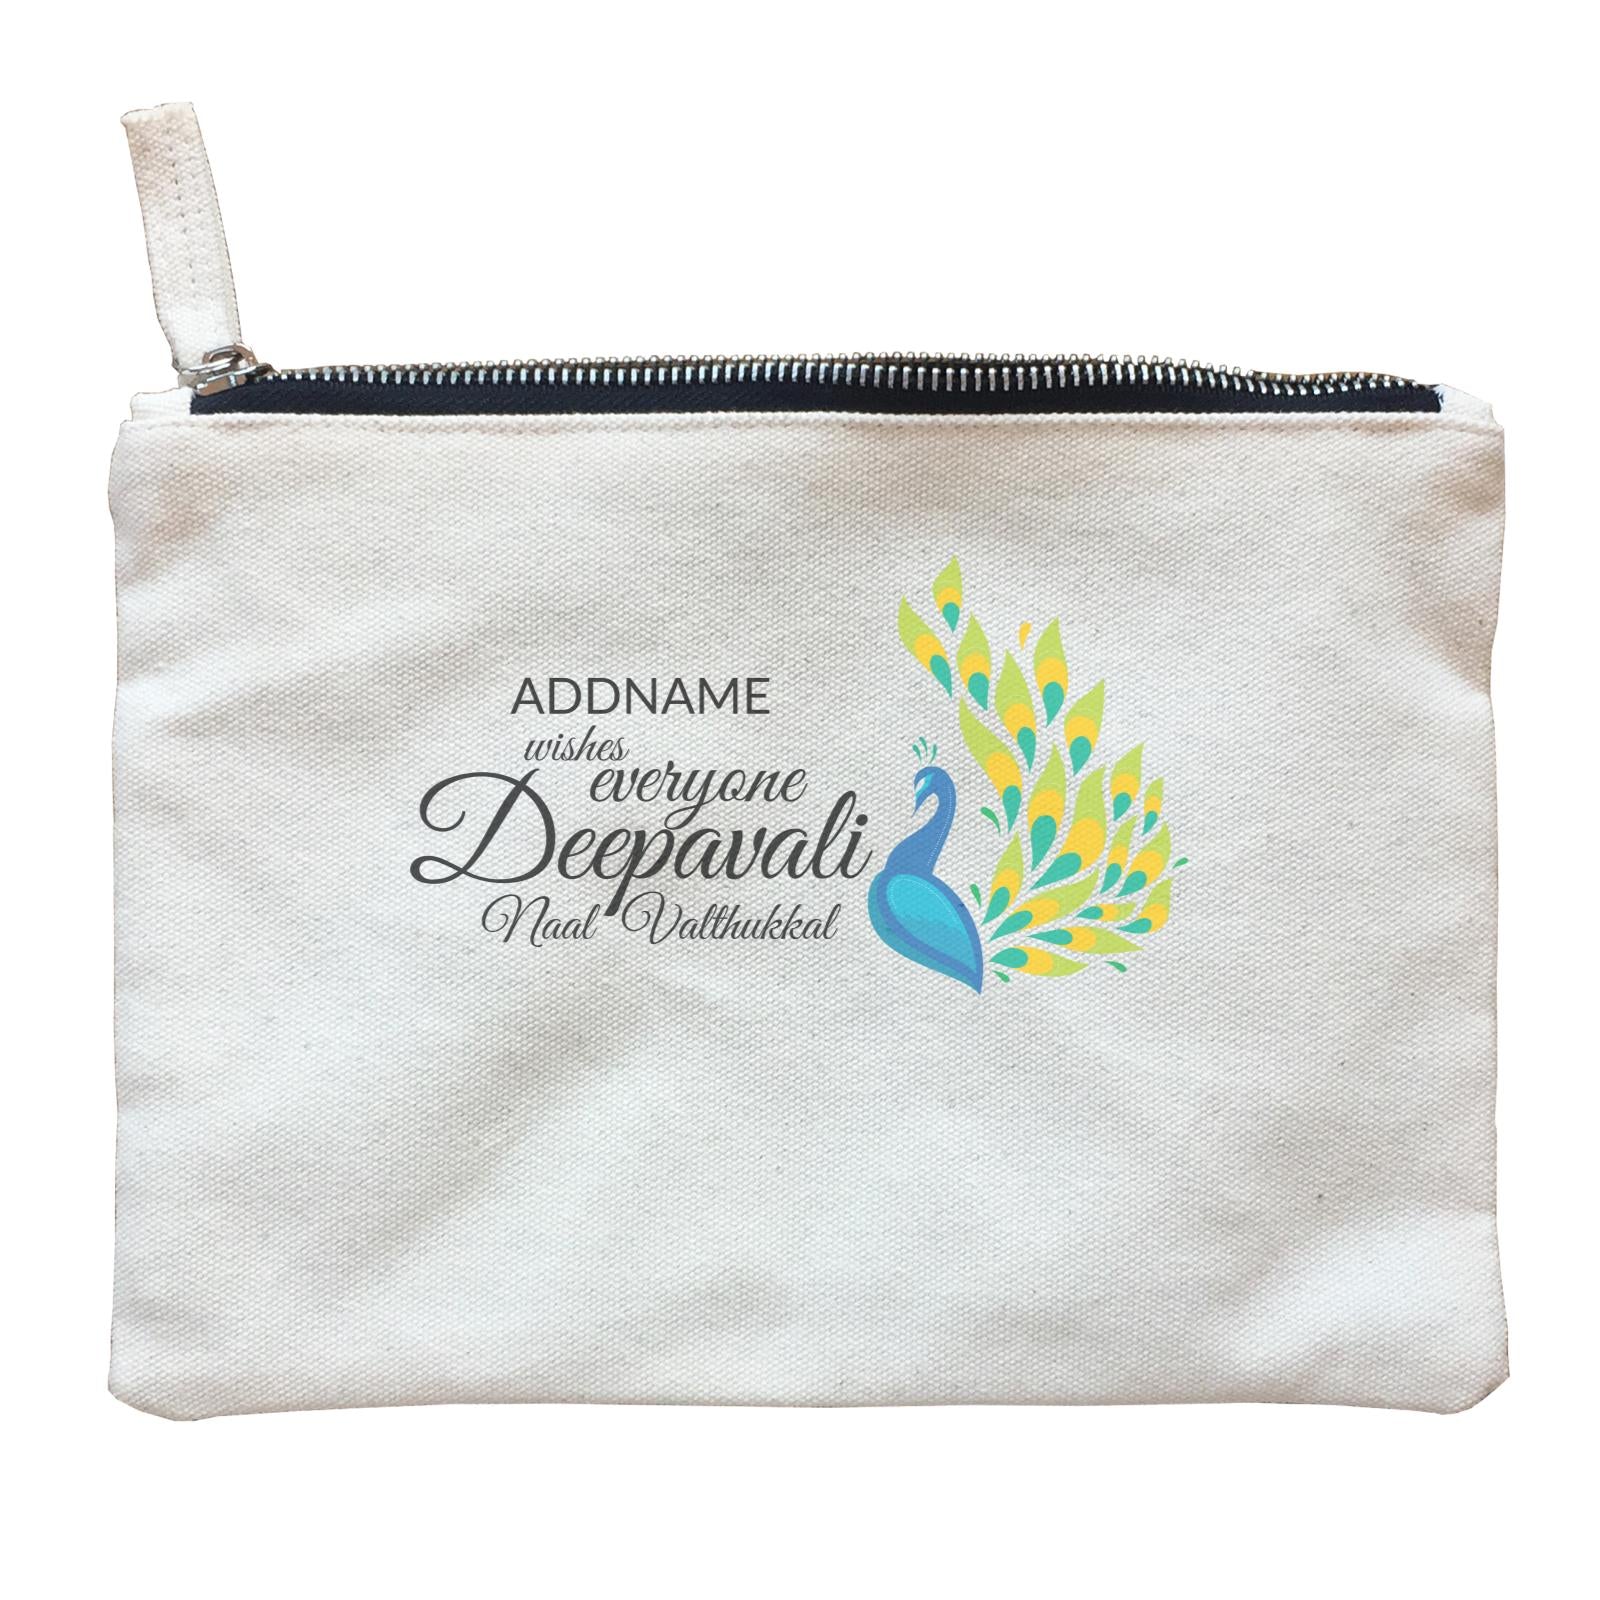 Deepavali Peacock Wishes everyone Deepavali Naal Valthukkal Addname Zipper Pouch